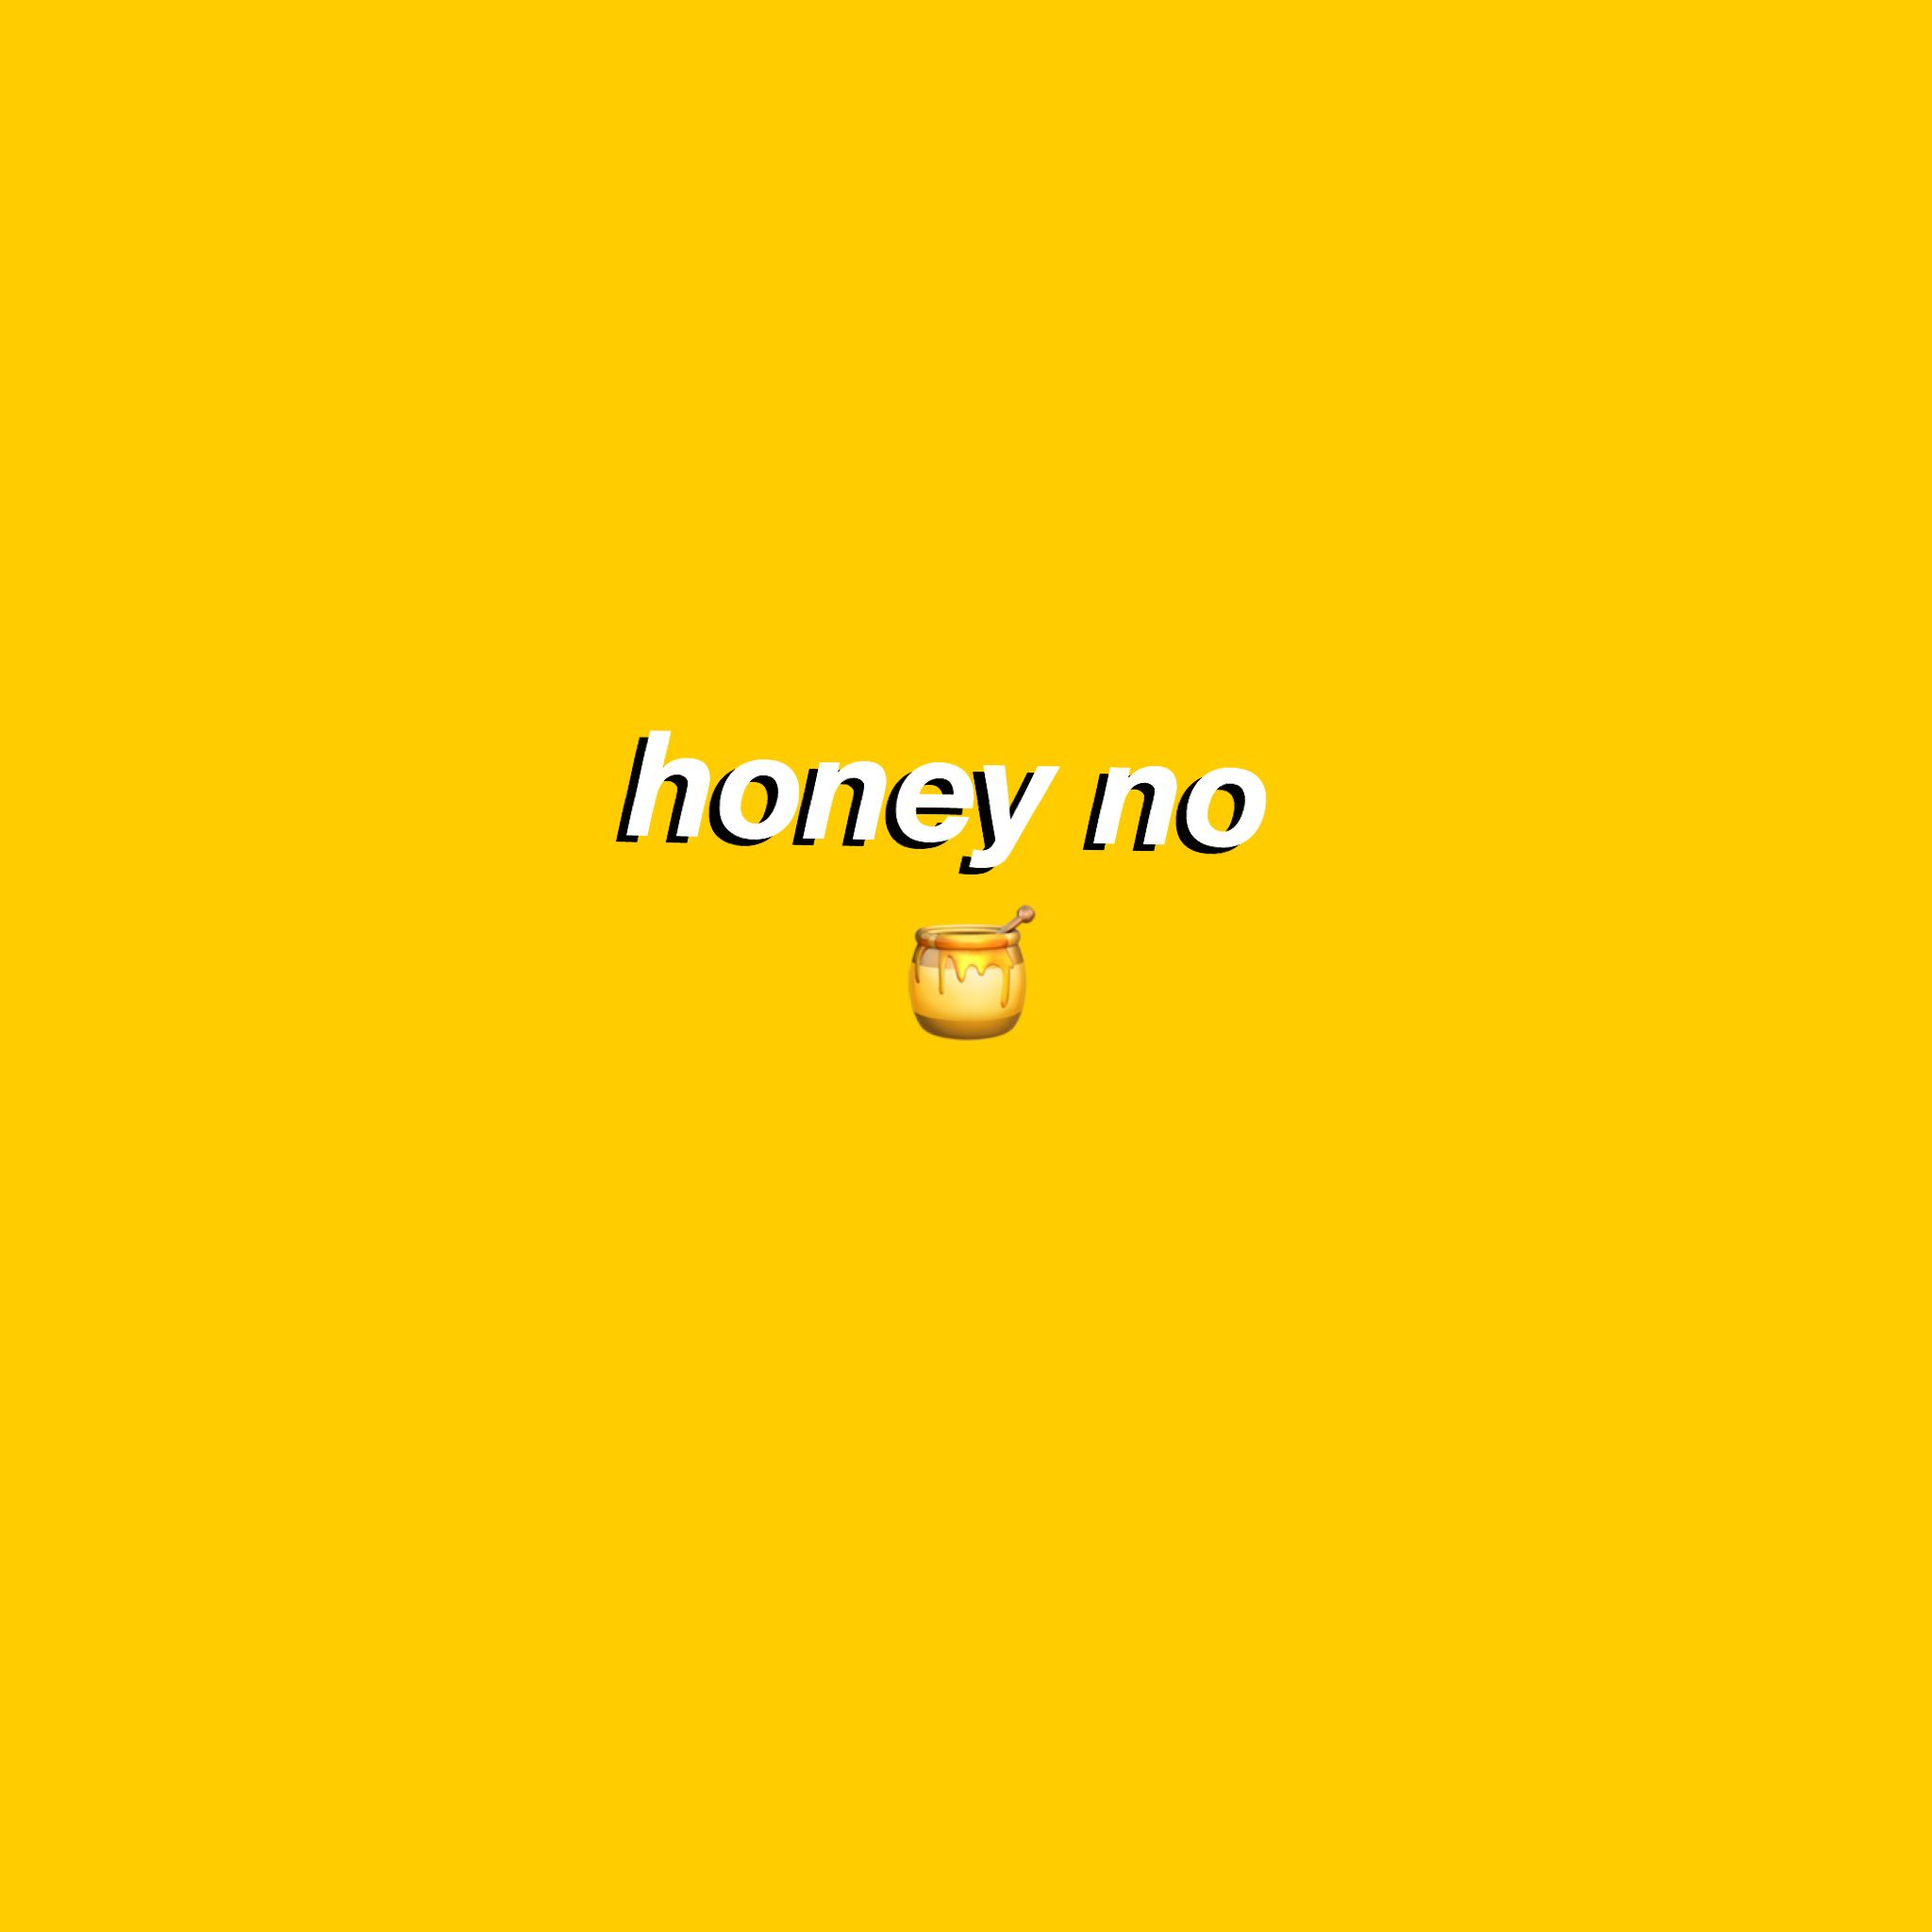 Honey no wallpaper for android - Yellow, honey